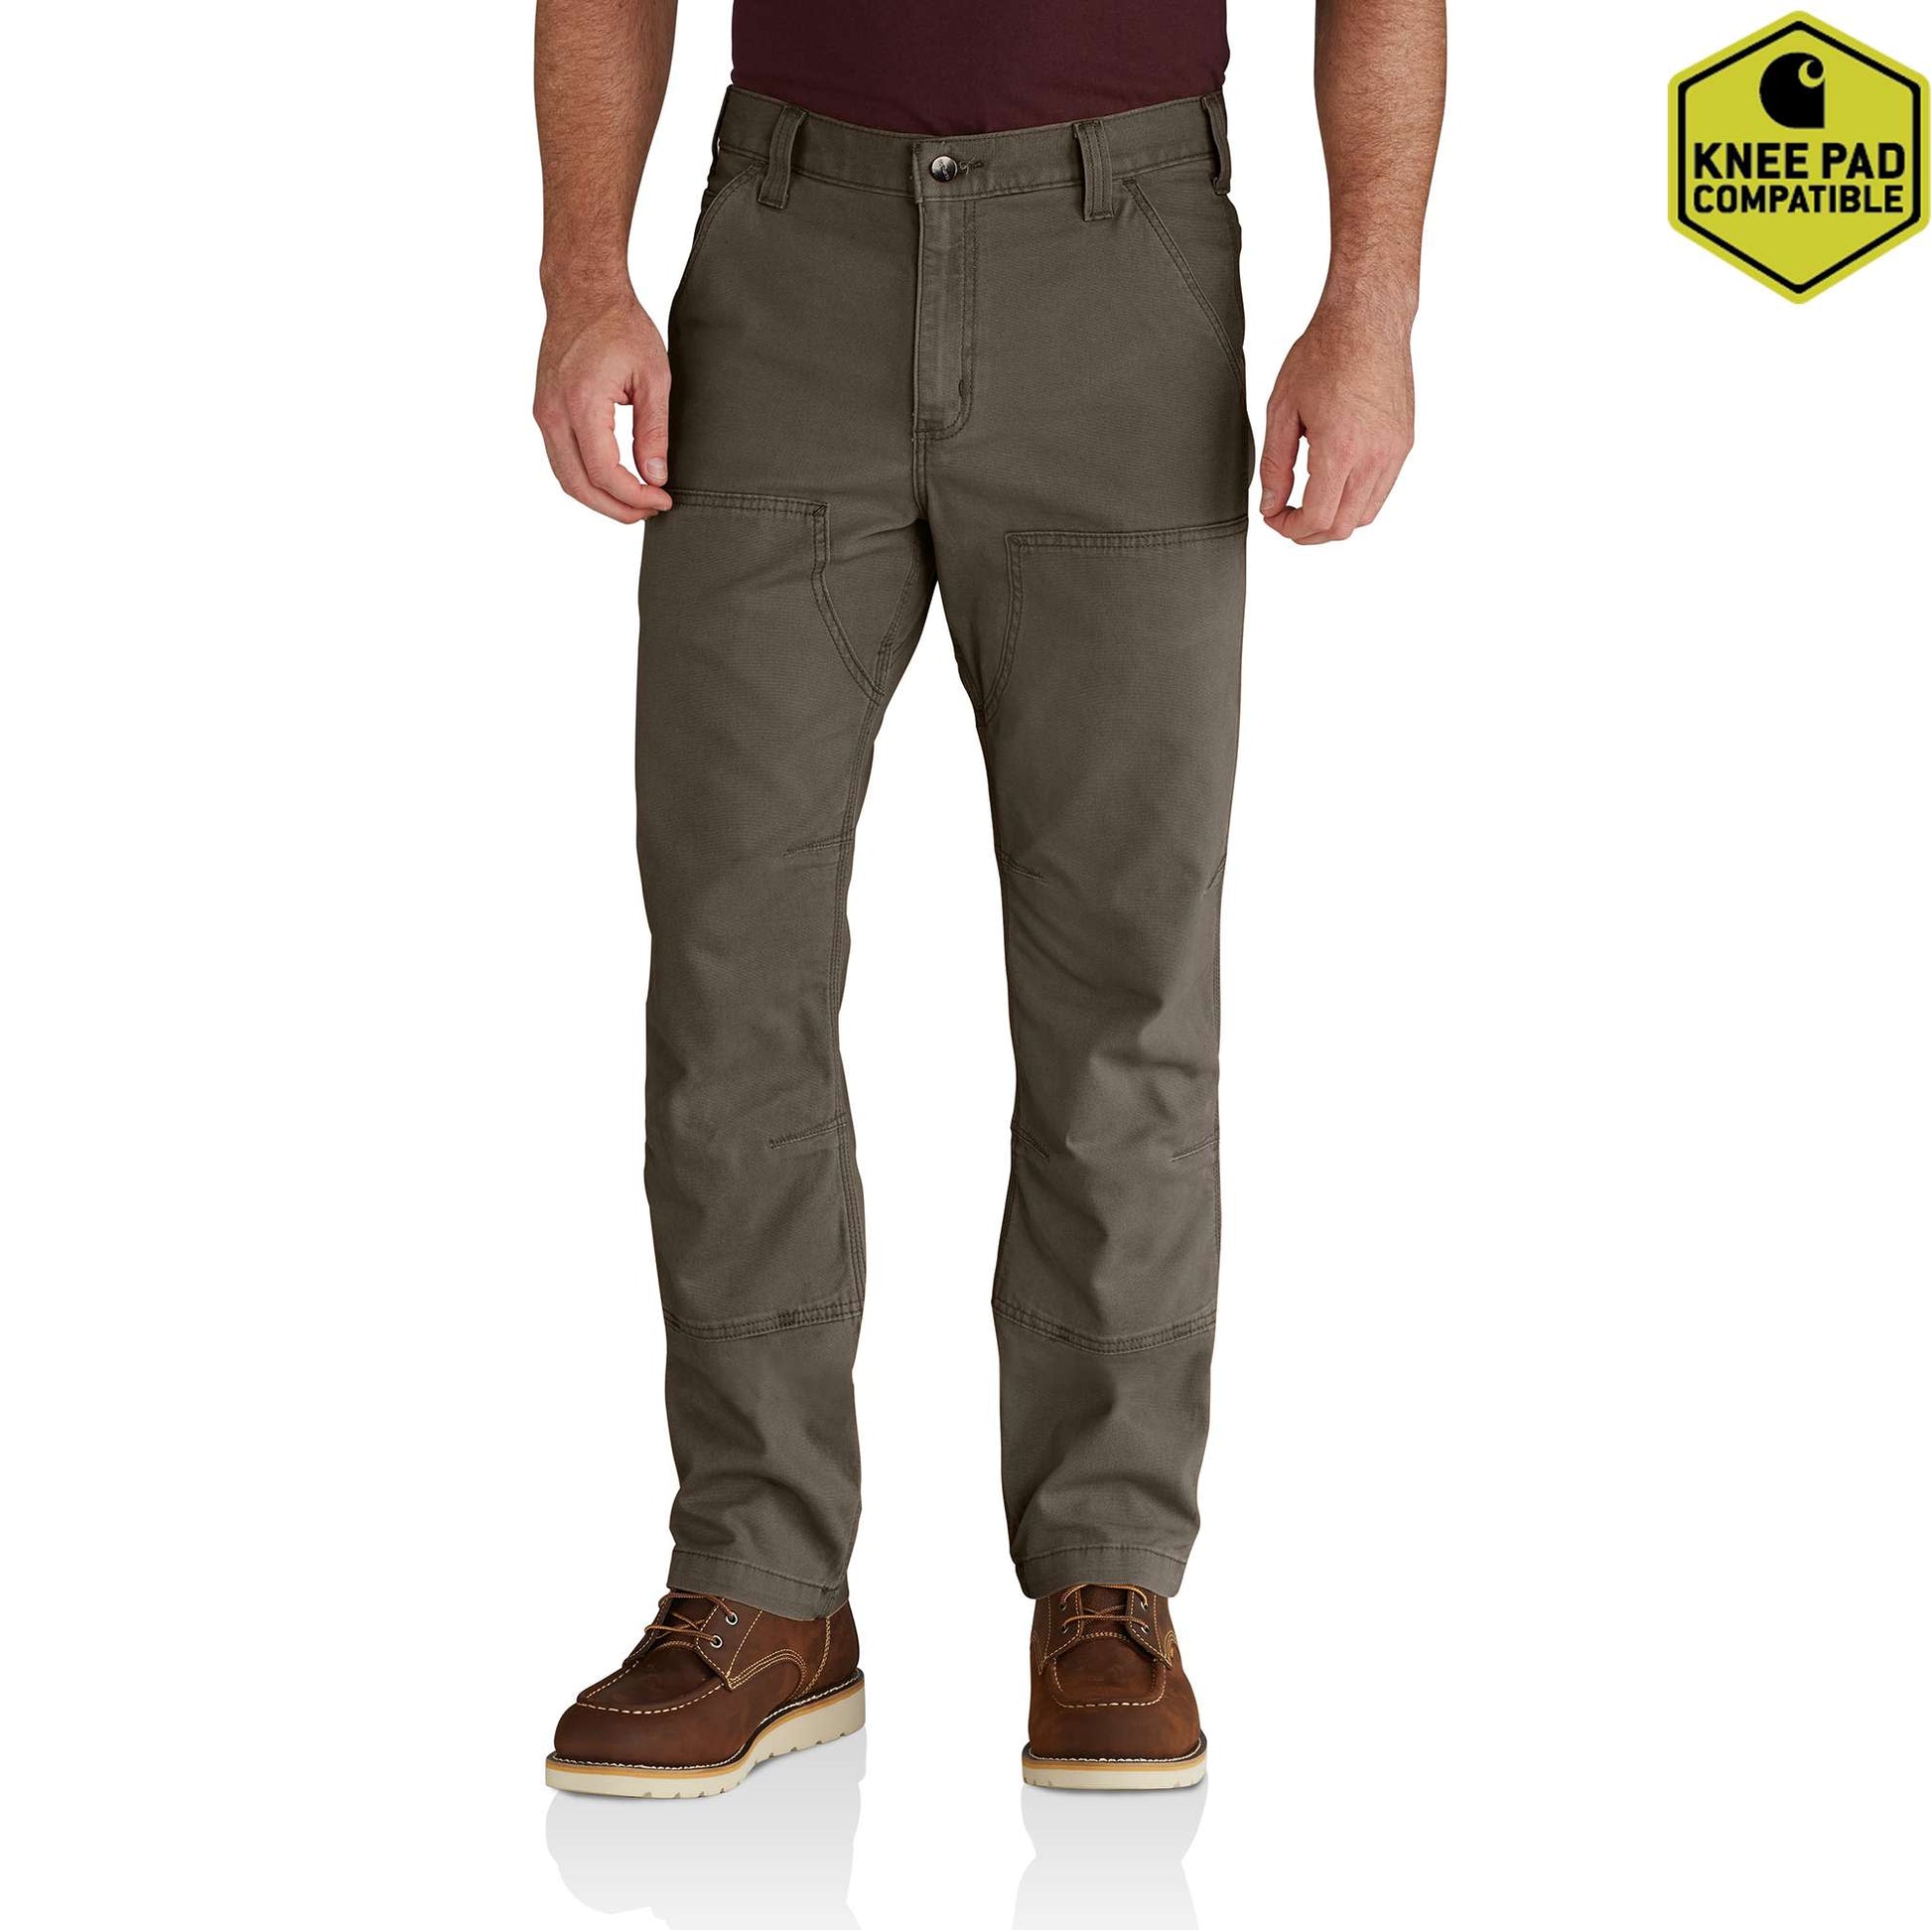 Carhartt Men's Rugged Flex Rigby Double Front Pant